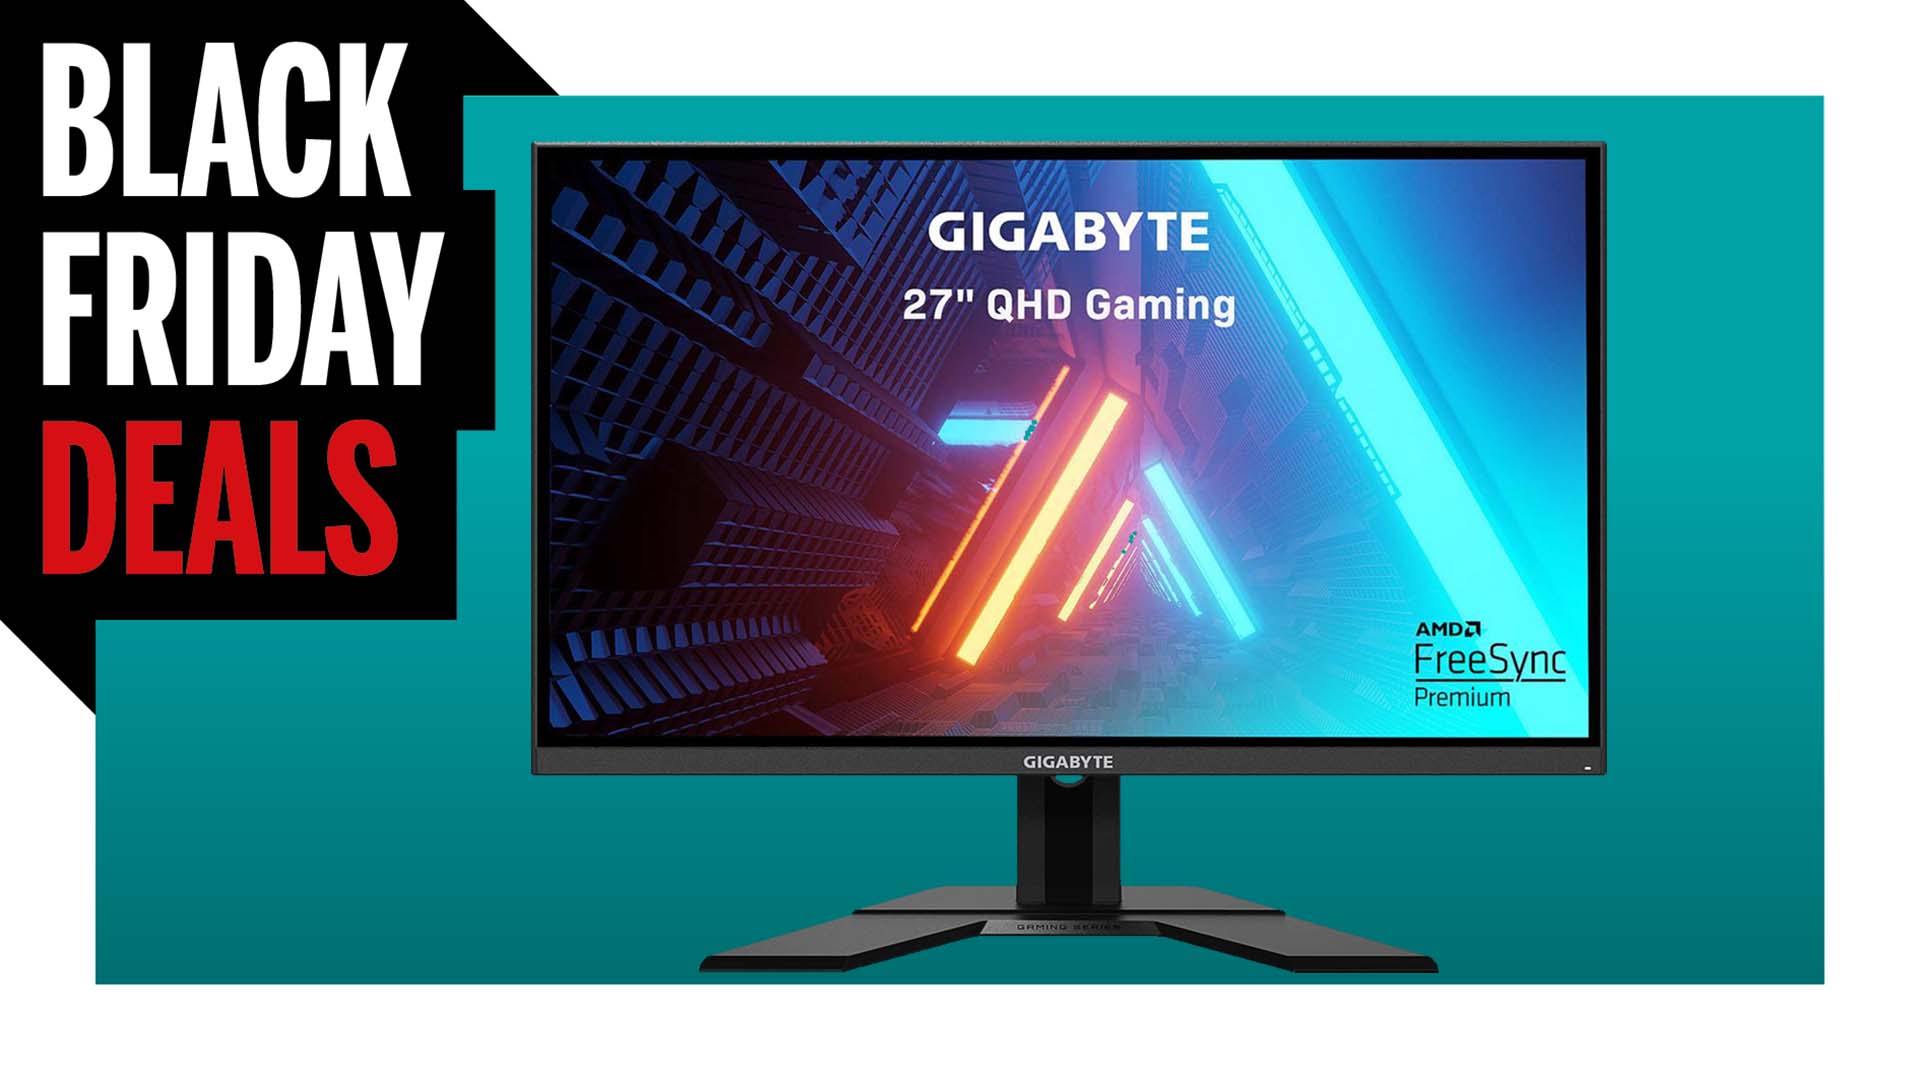  Gigabyte's G27Q is one of our favorite monitors and it's on sale for $260 